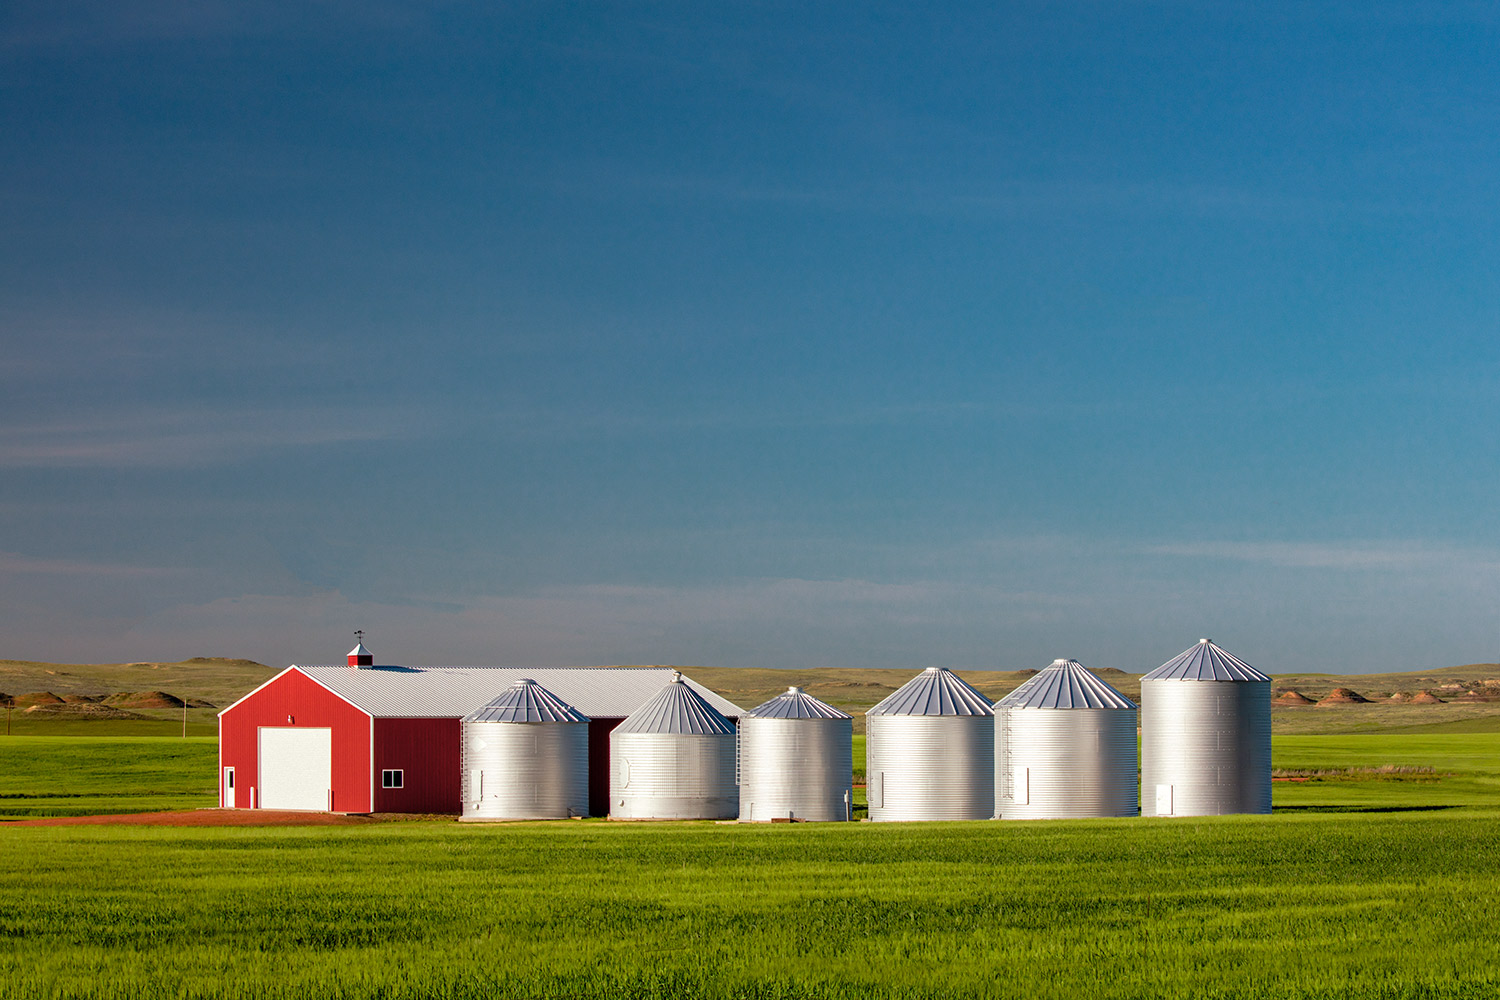 6 Bins and a Red Shed